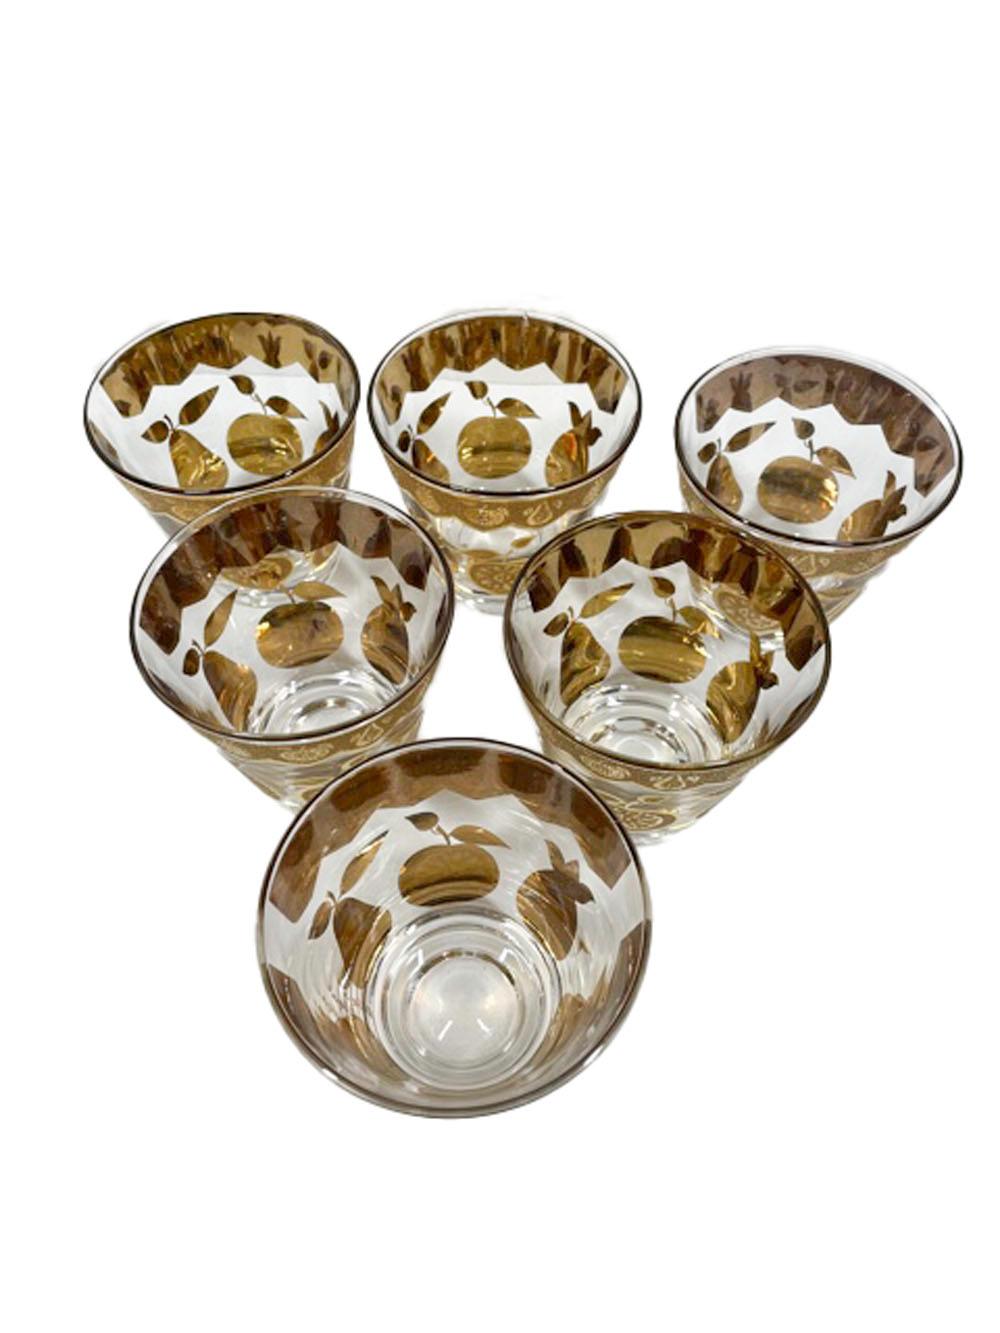 20th Century Vintage Culver Florentine Pattern Cocktail Pitcher and 6 Old Fashioned Glasses